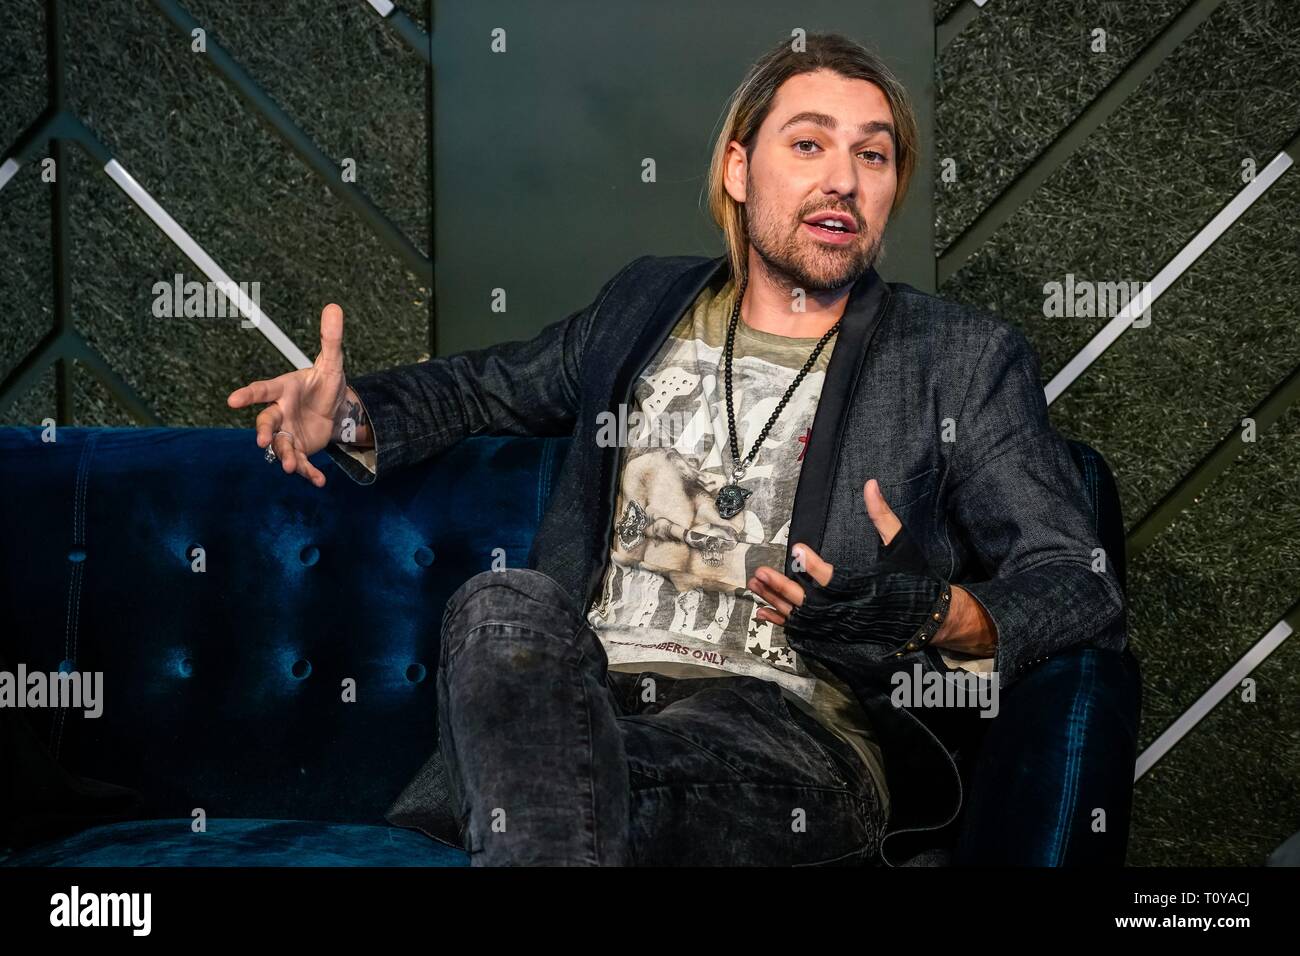 Berlin, Deutschland. 21st Mar, 2019. 21.03.2019, star violinist David Garrett presents his new crossover tour UNLIMITED - GREATEST HITS at the 260-degree bar in Berlin, with which he will perform in the capital. Portrait of the musician. | usage worldwide Credit: dpa/Alamy Live News Stock Photo